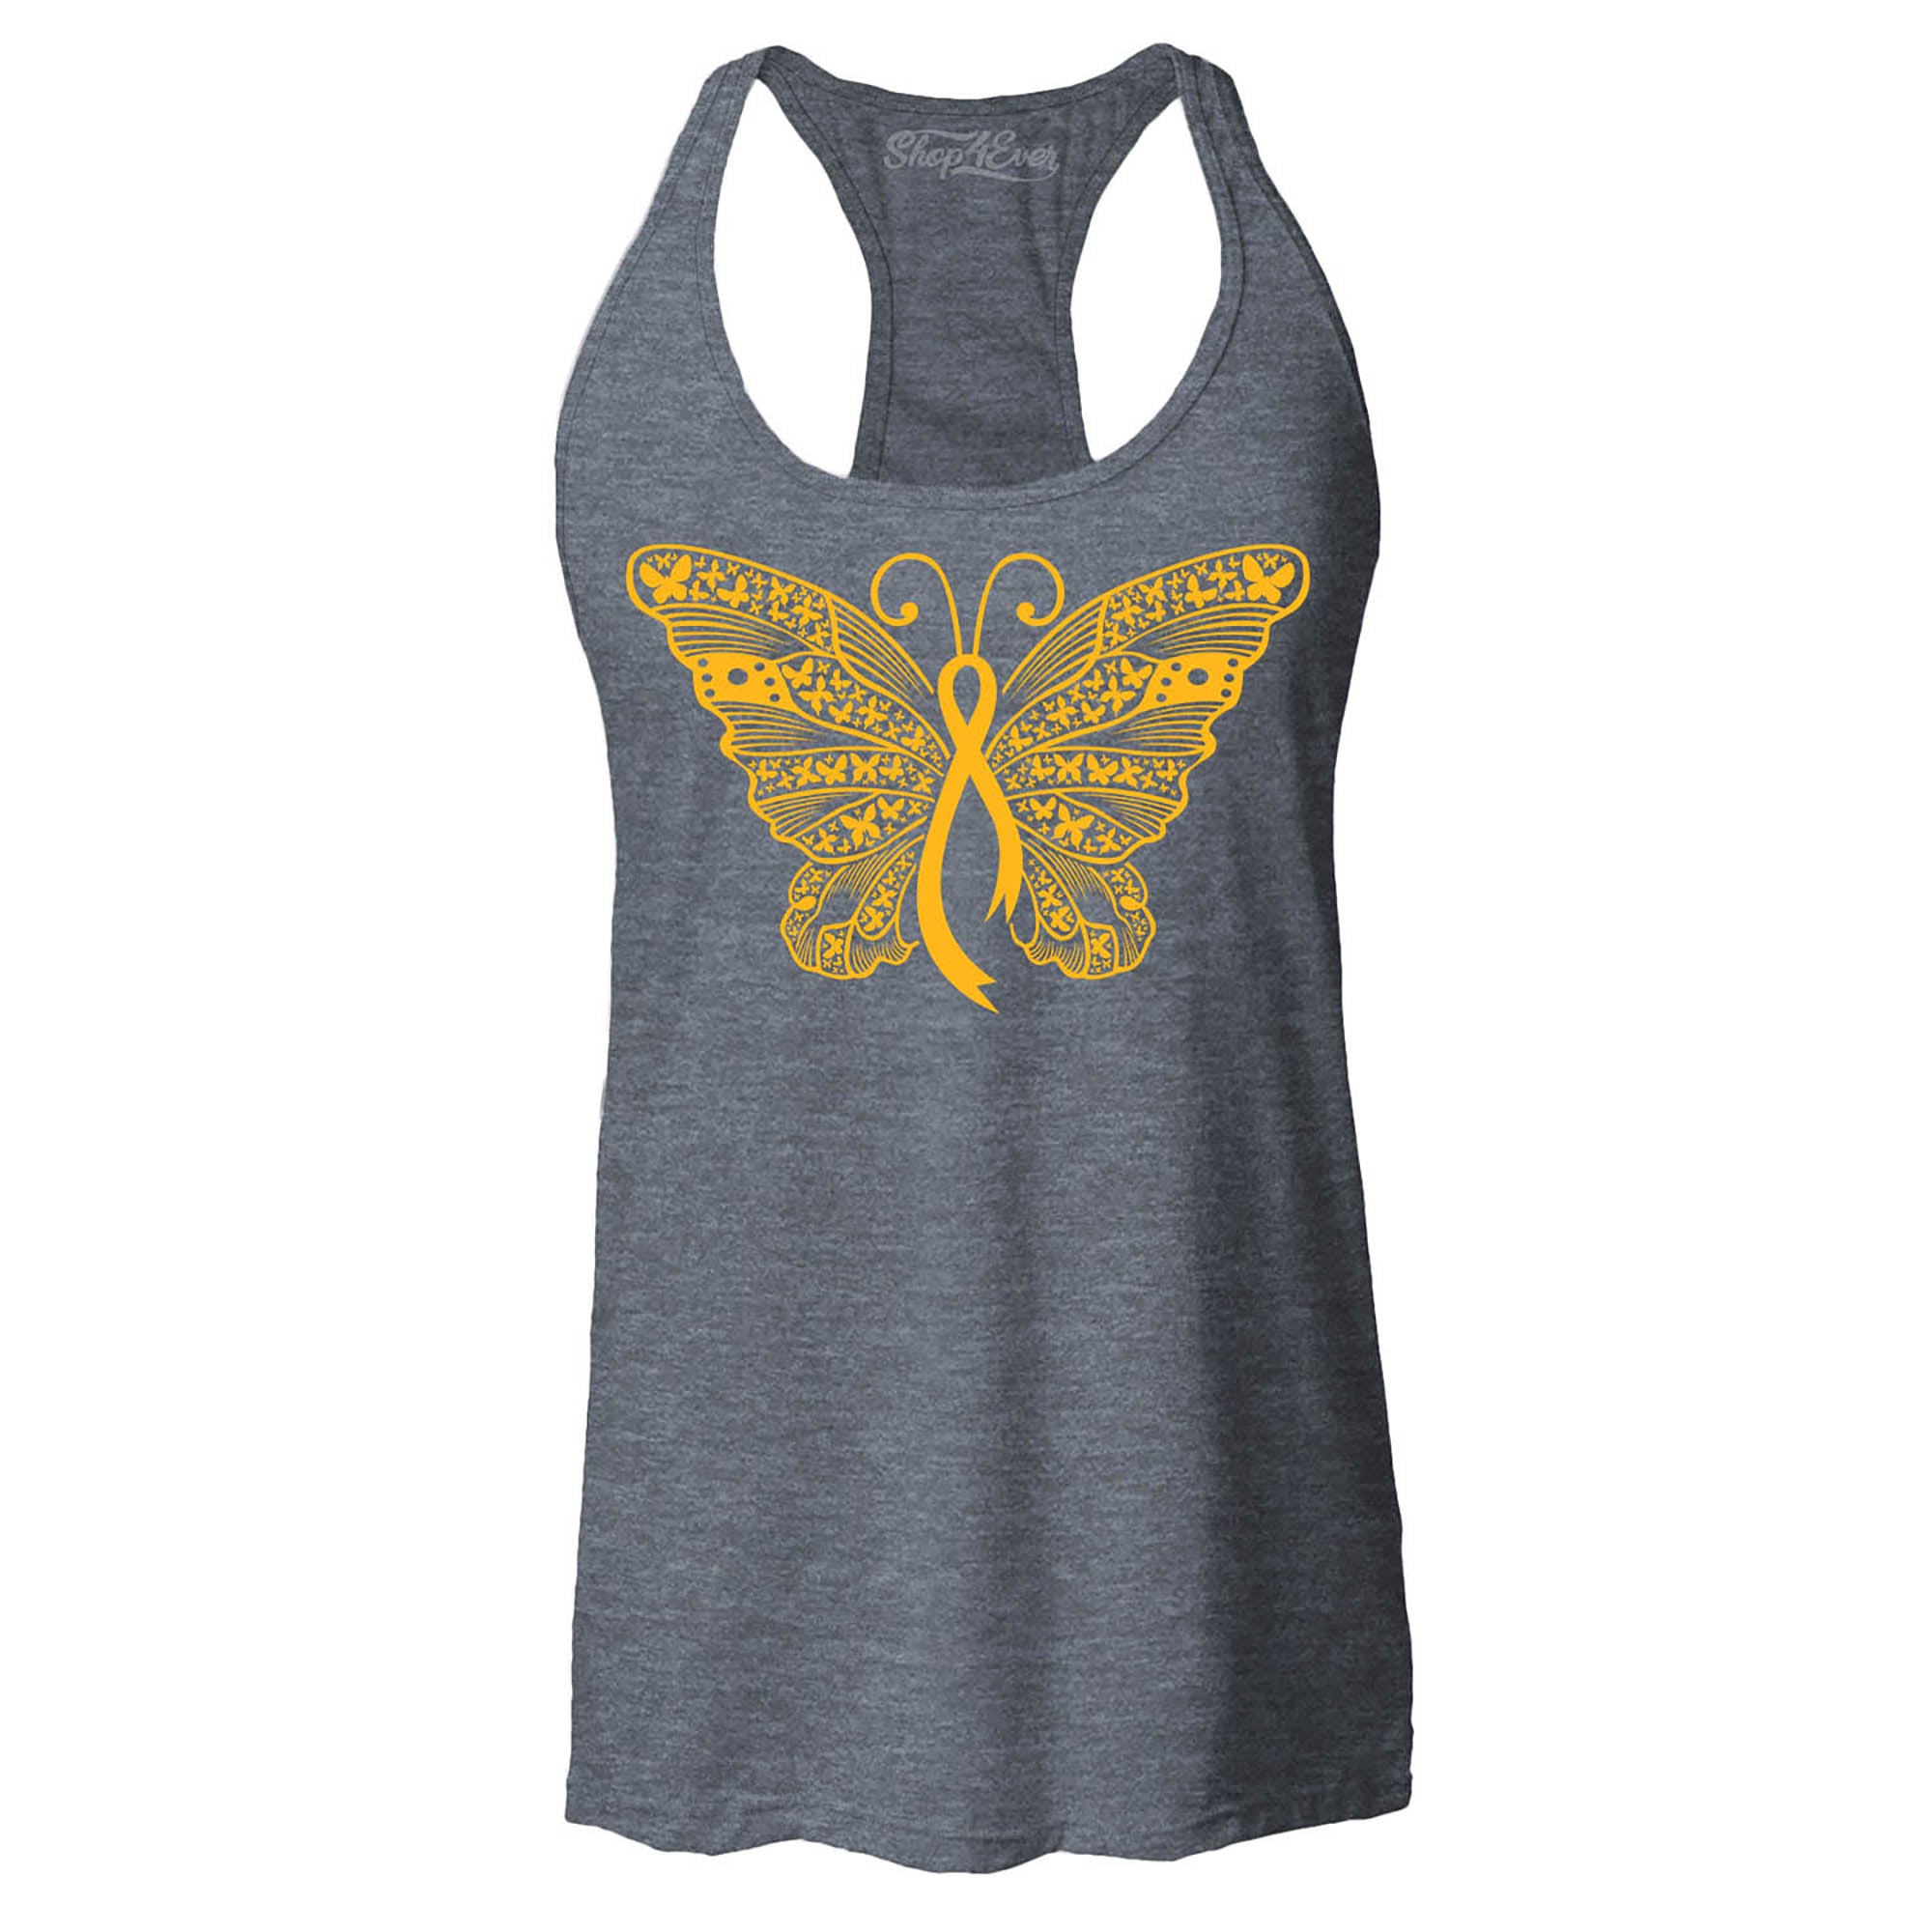 Gold Ribbon Butterfly Childhood Cancer Awareness Women's Racerback Tank Top Slim Fit